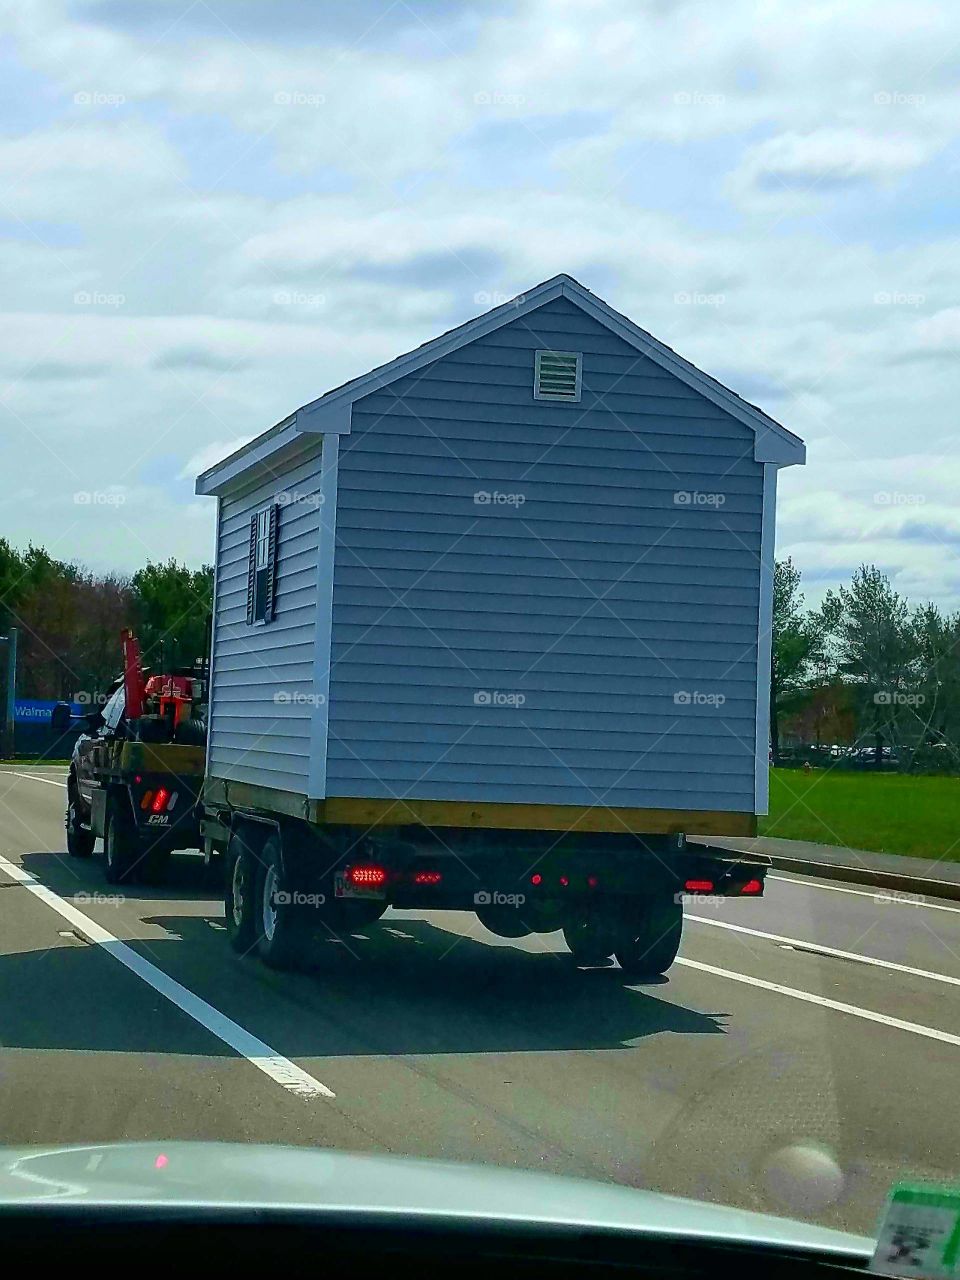 Truck was hauling this small building or shed on a flatbed. Got this pic as it was driving down road.